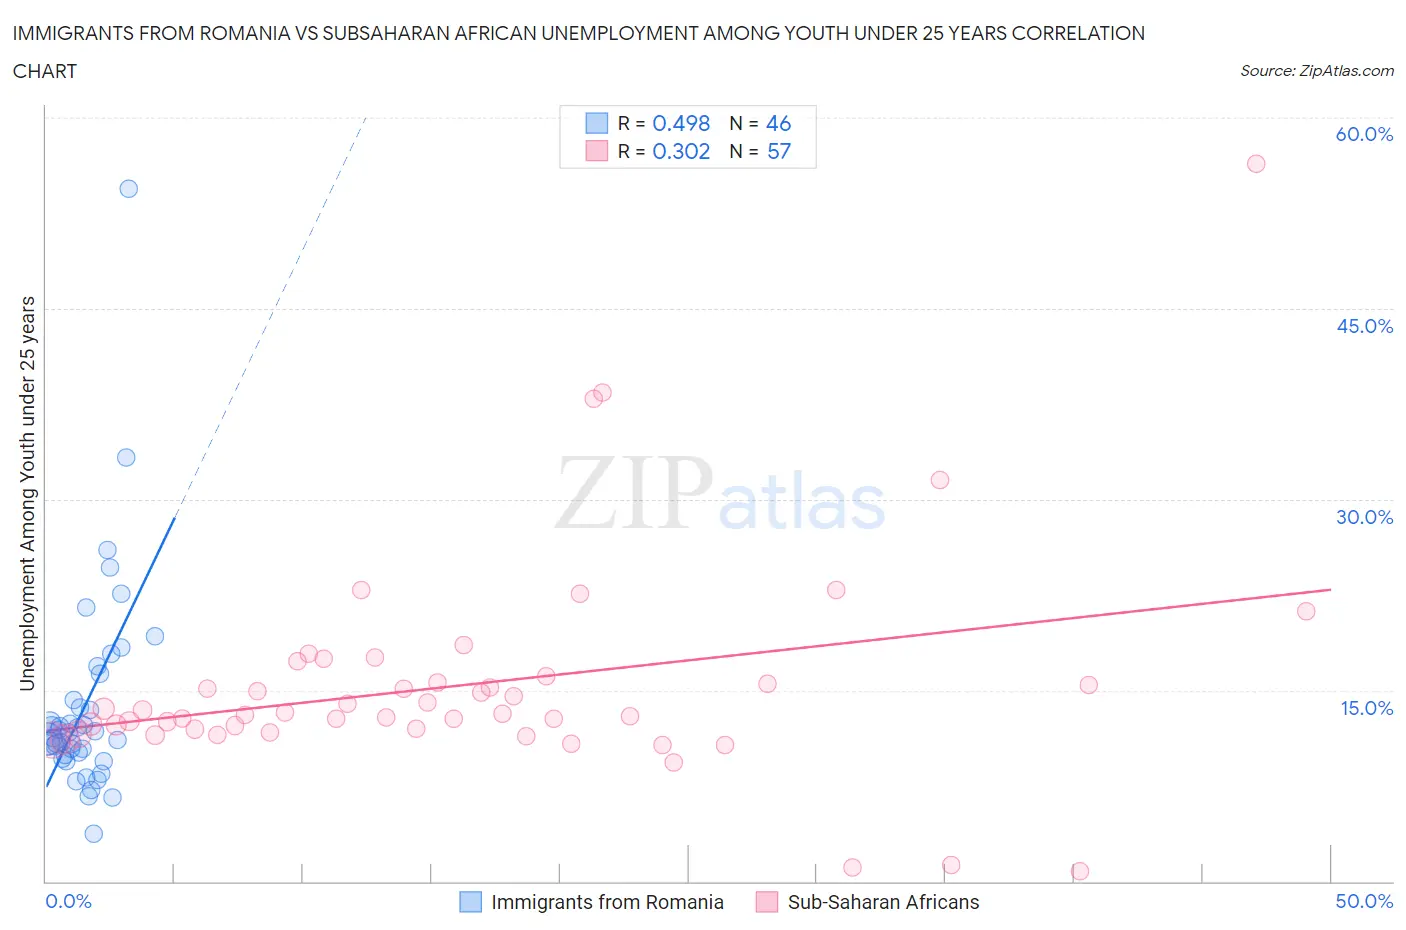 Immigrants from Romania vs Subsaharan African Unemployment Among Youth under 25 years